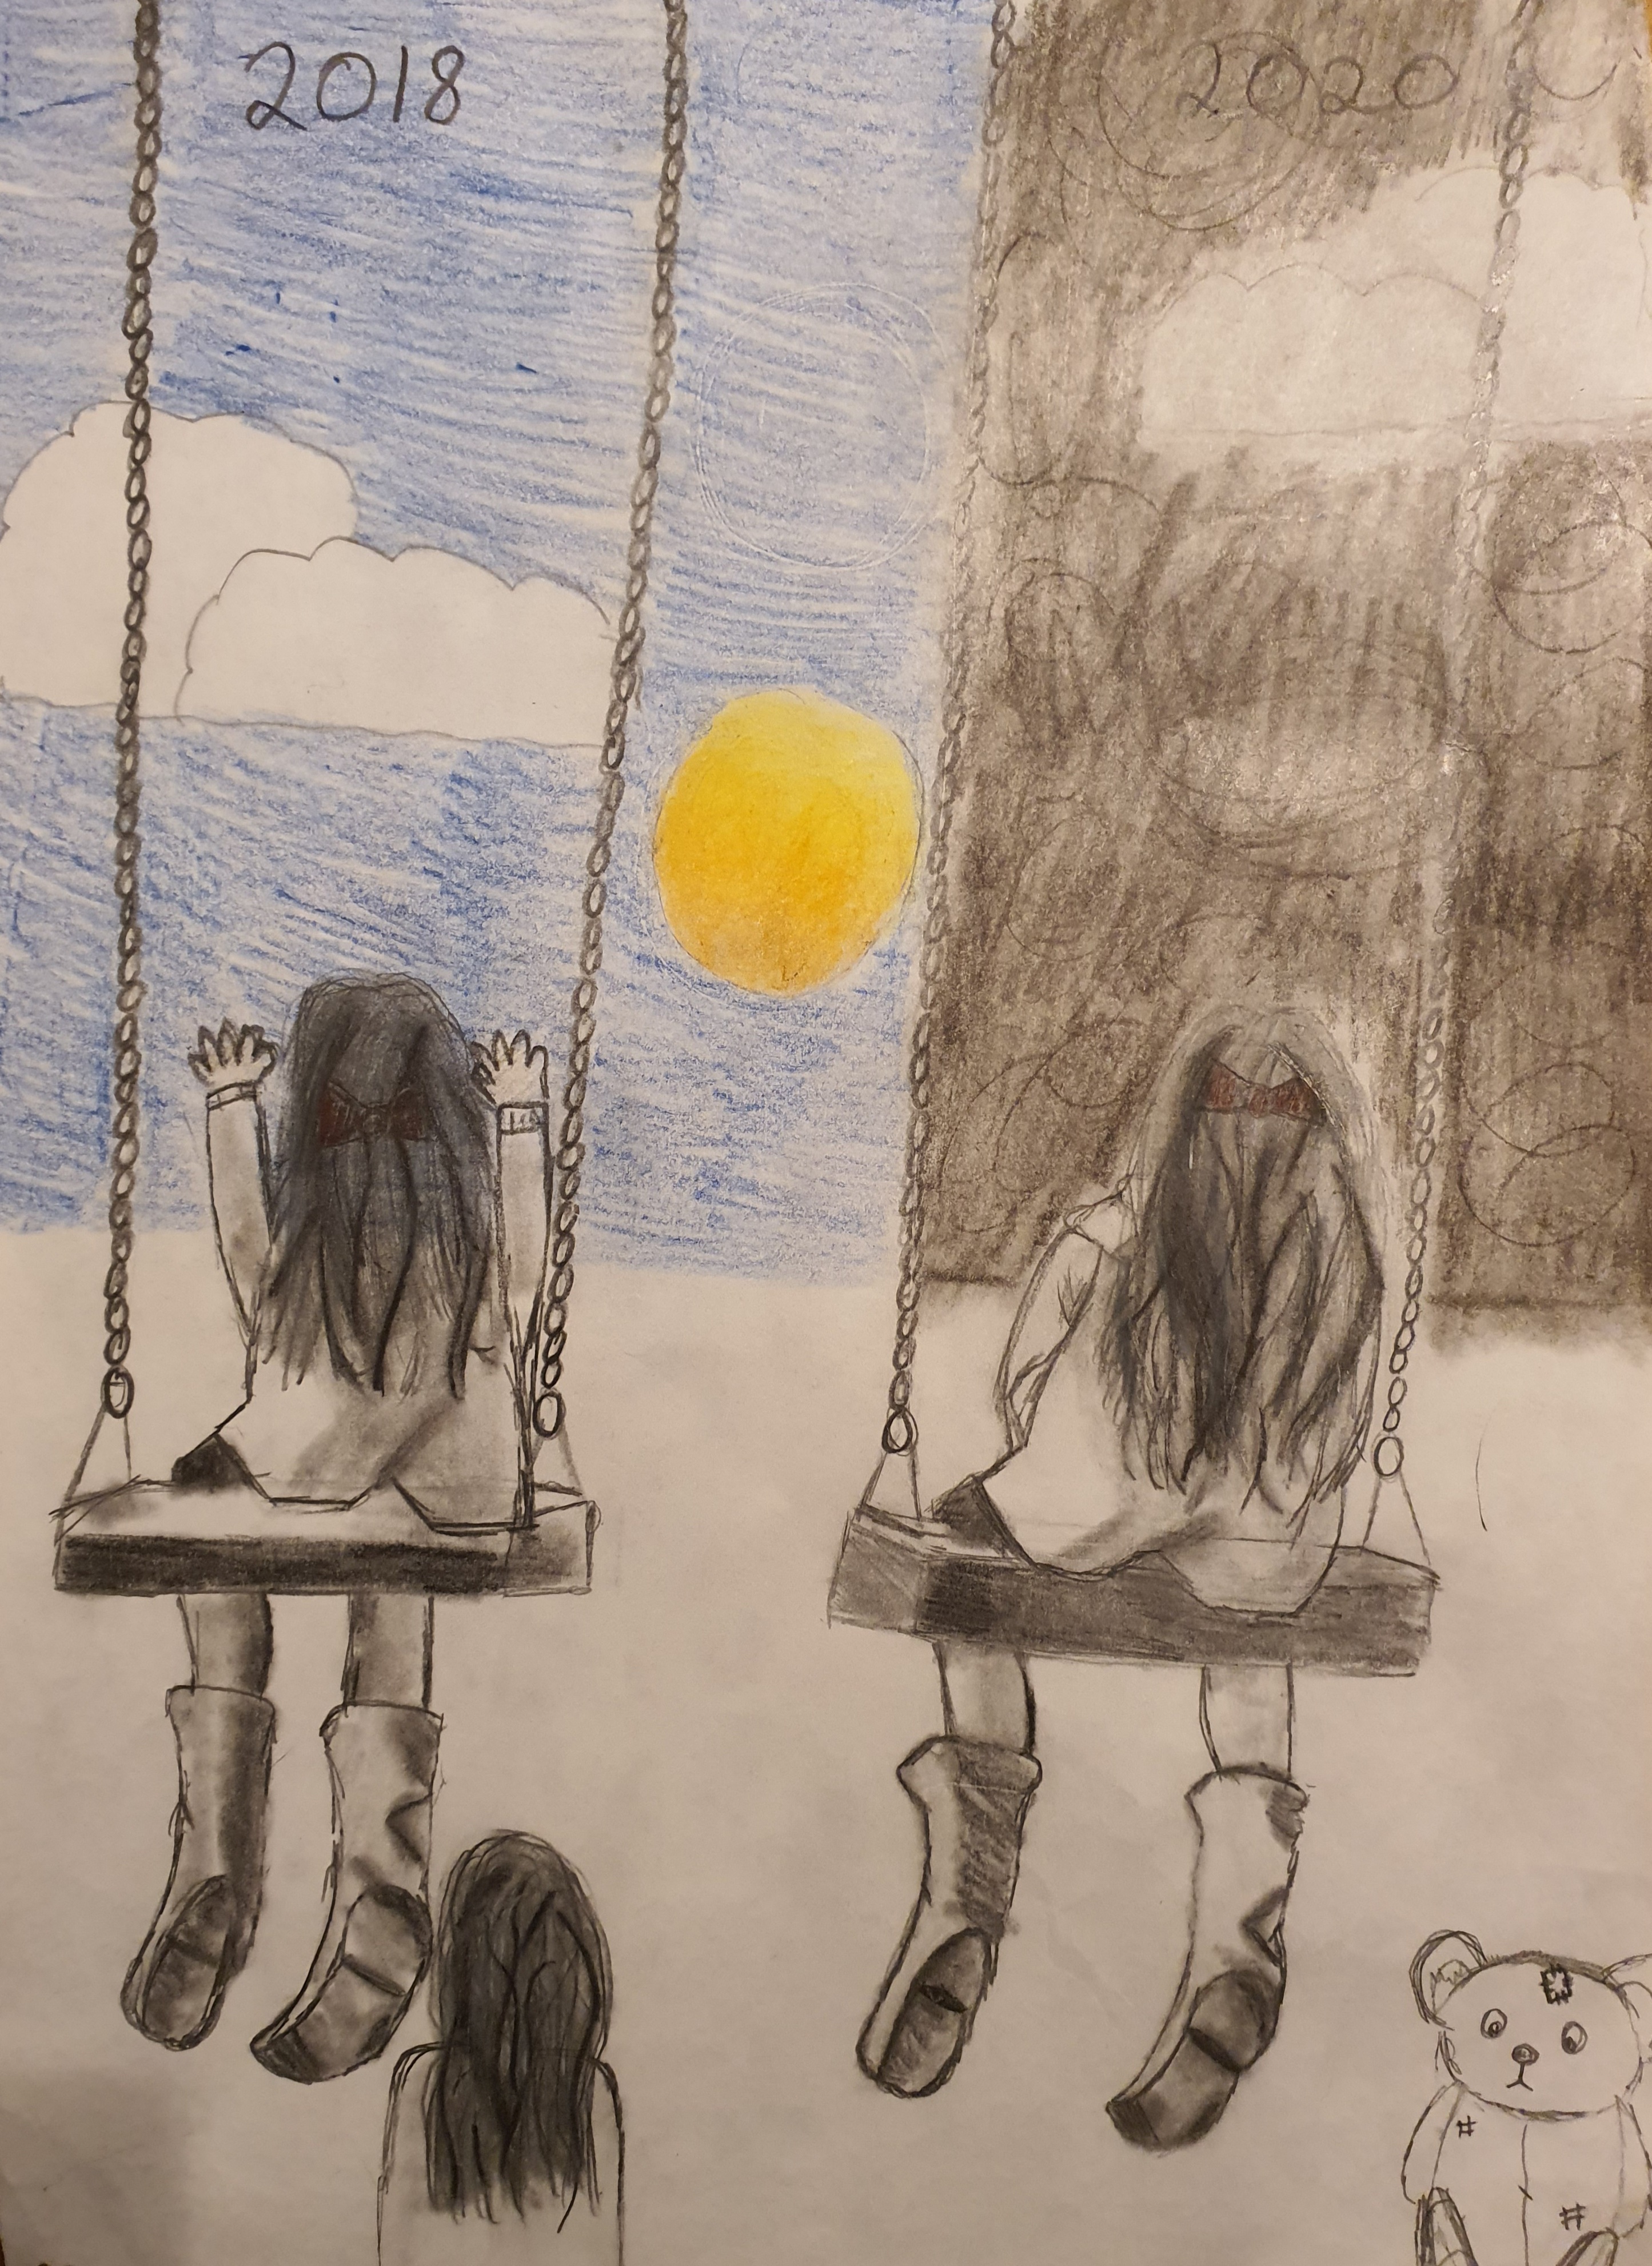 'Lonely Rules' by Rachel (11) from Wexford